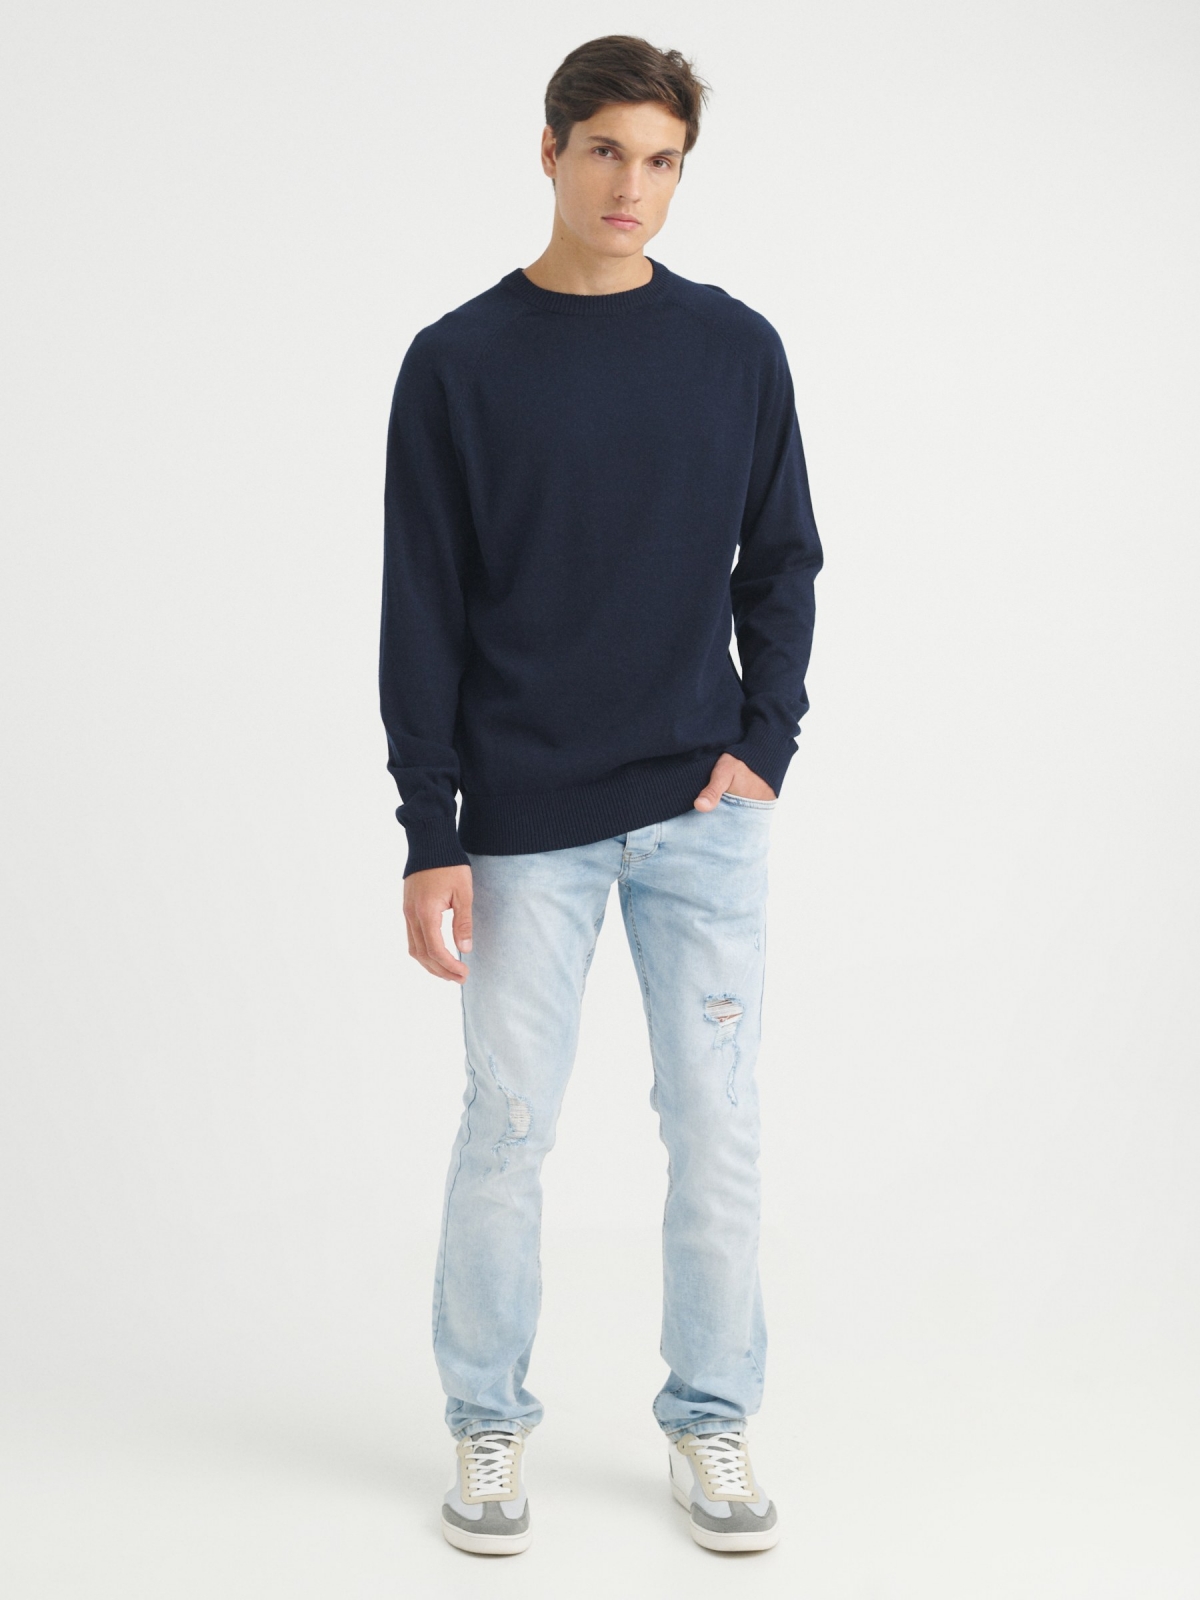 Plain sweater round neck navy front view